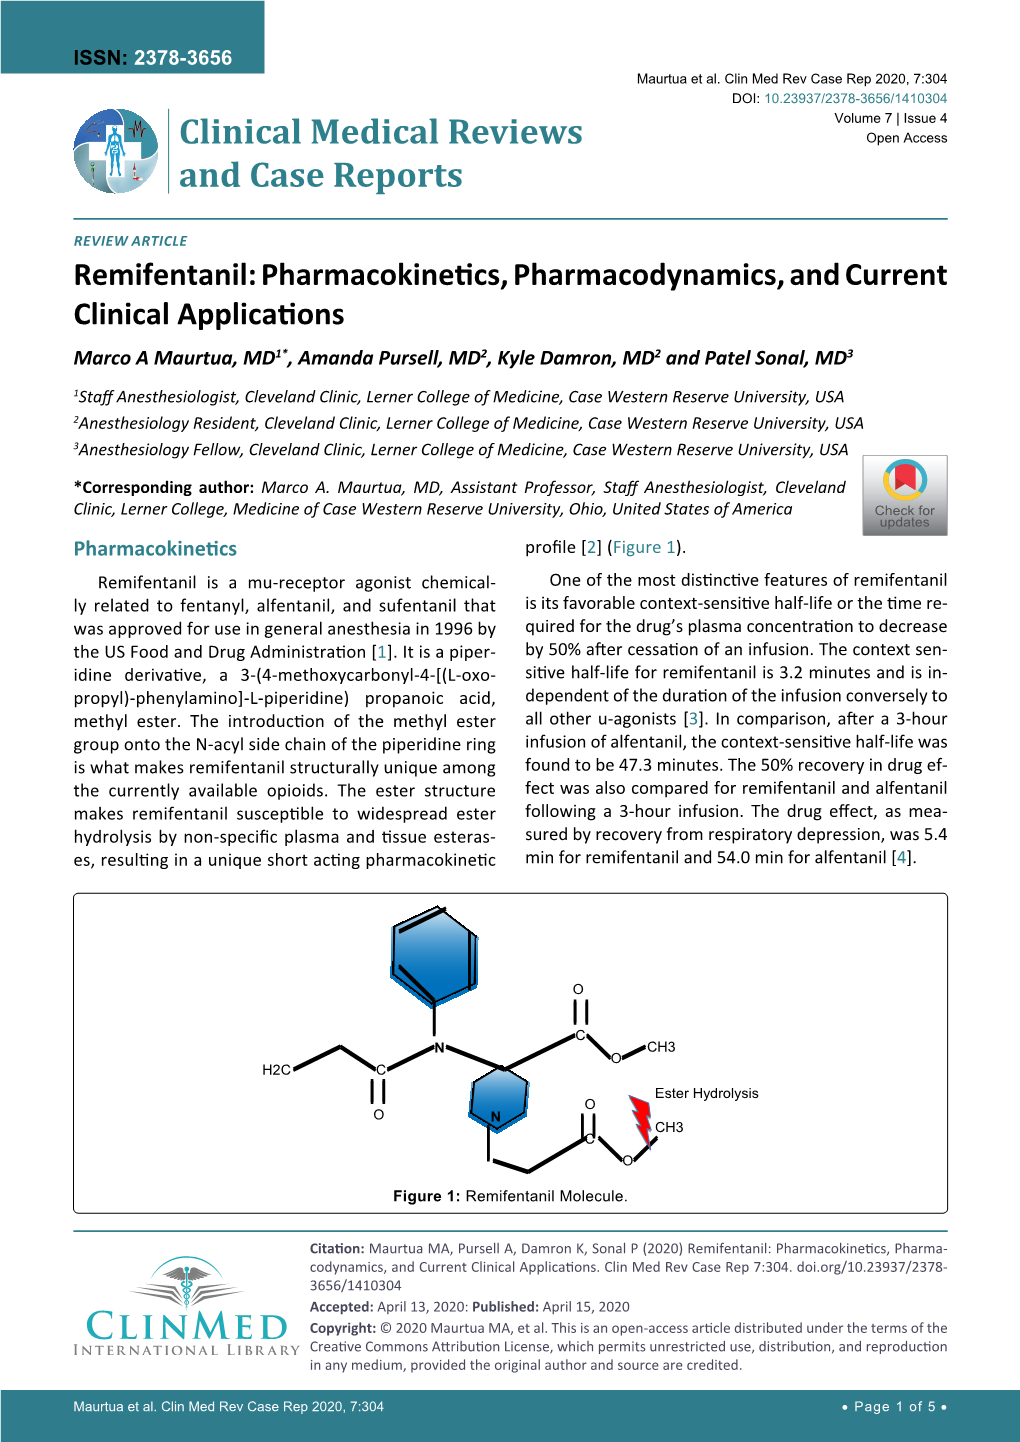 Remifentanil: Pharmacokinetics, Pharmacodynamics, and Current Clinical Applications Marco a Maurtua, MD1*, Amanda Pursell, MD2, Kyle Damron, MD2 and Patel Sonal, MD3